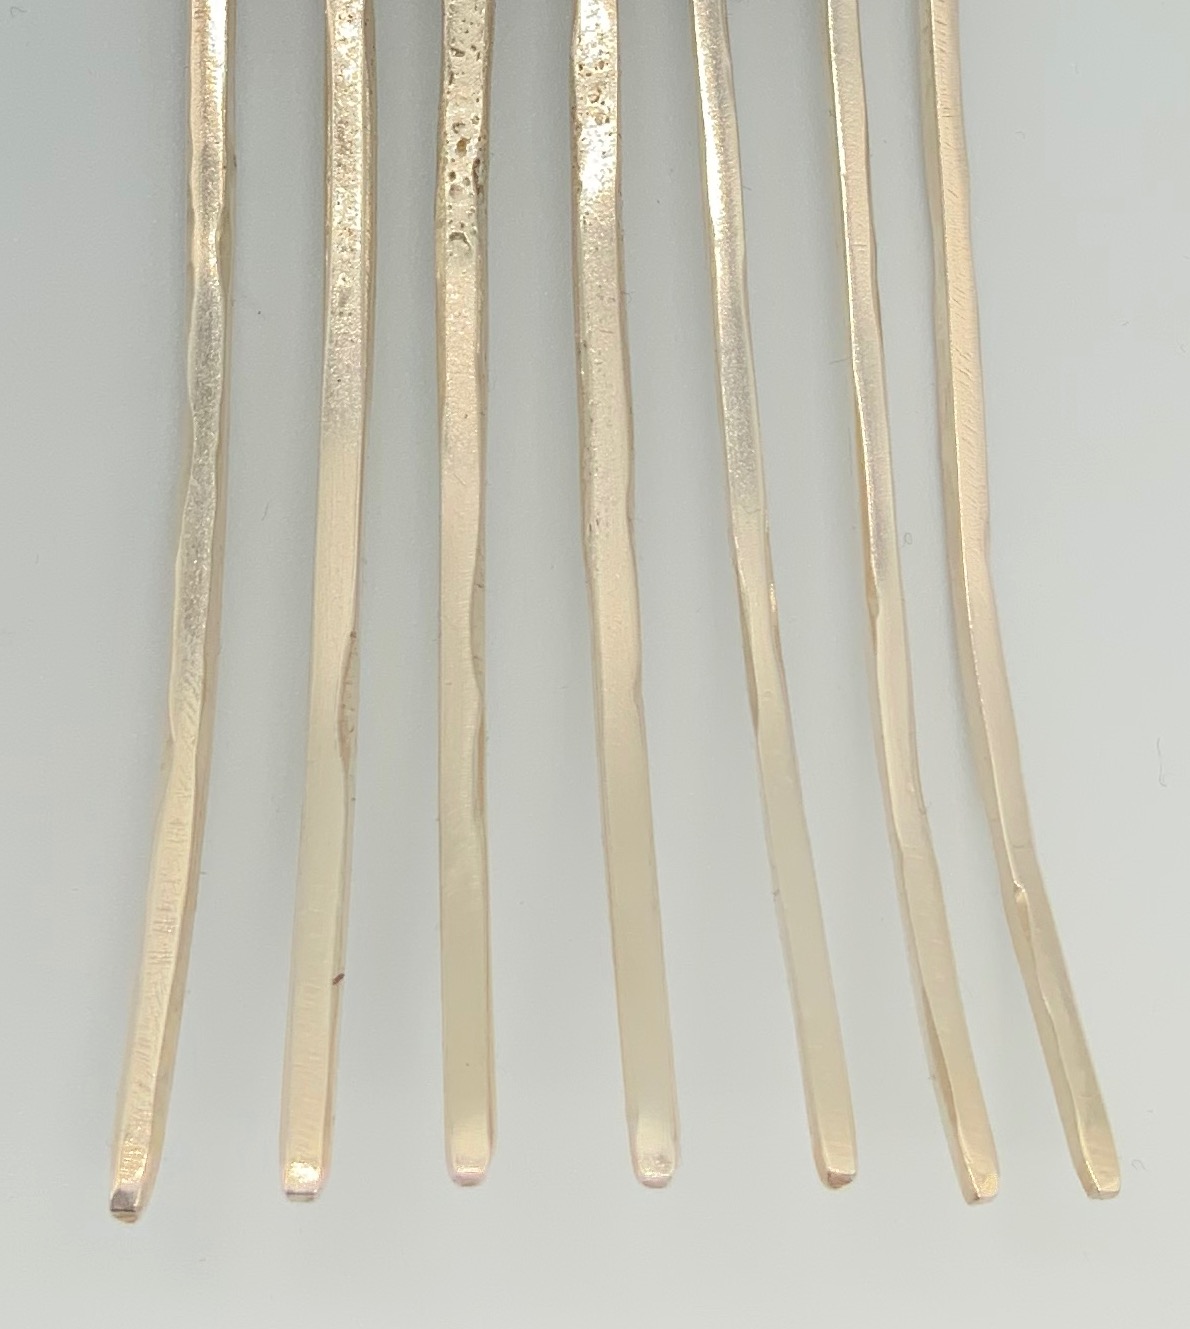 “Seven silver sticks of old”